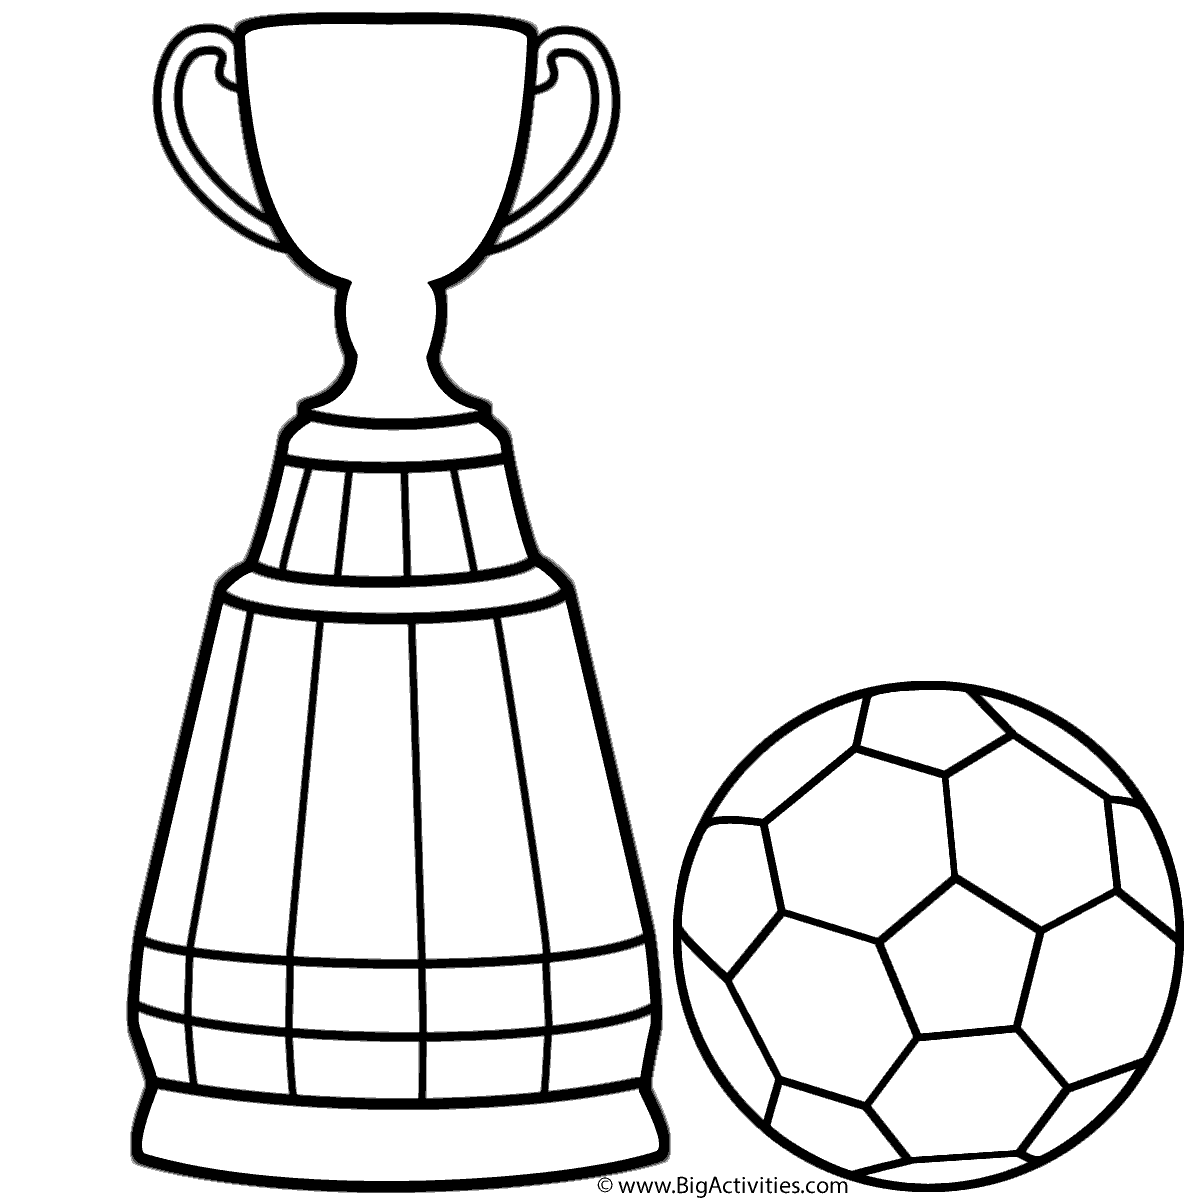 Download World Cup Trophy with Soccer Ball - Coloring Page (World Cup)